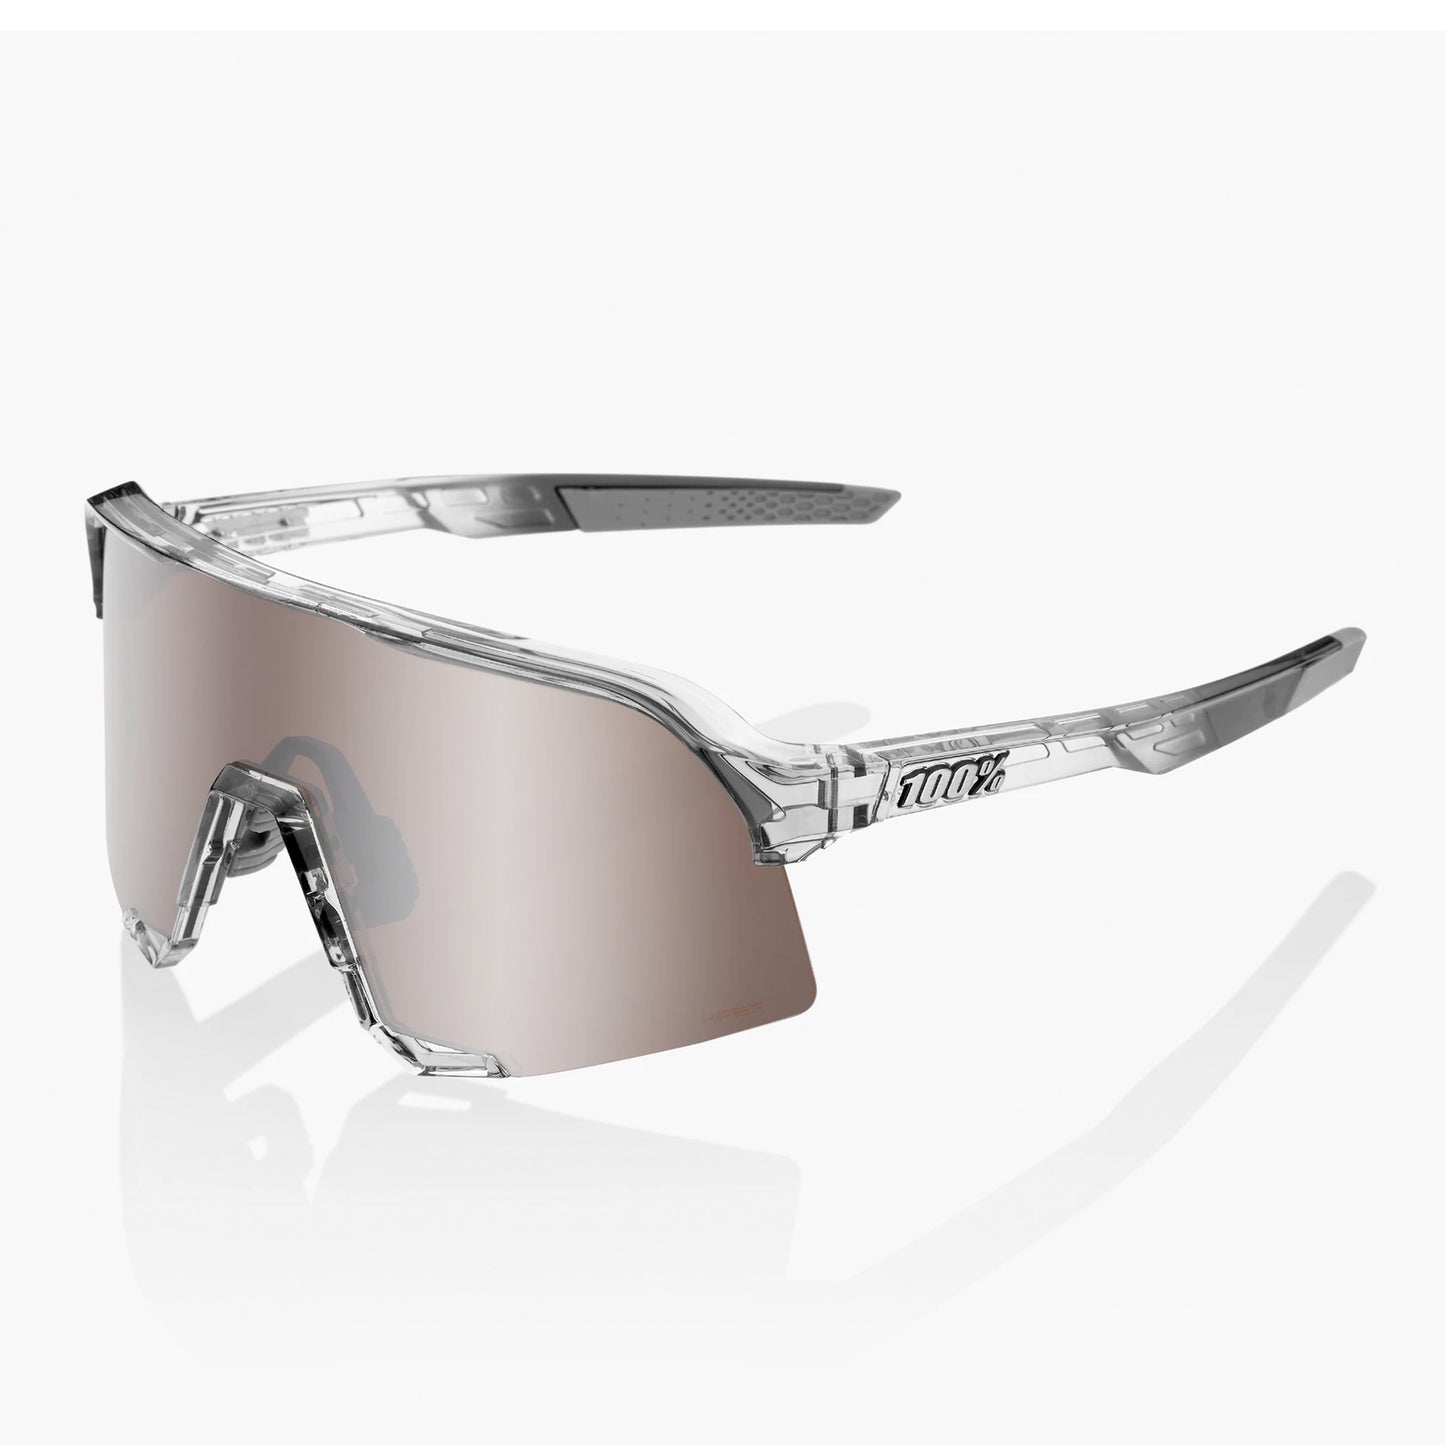 100% S3 Cycling Sunglasses - Translucent Grey, Hiper Silver Mirror + Clear Lens Included buy online at Woolys Wheels Sydney with free delivery